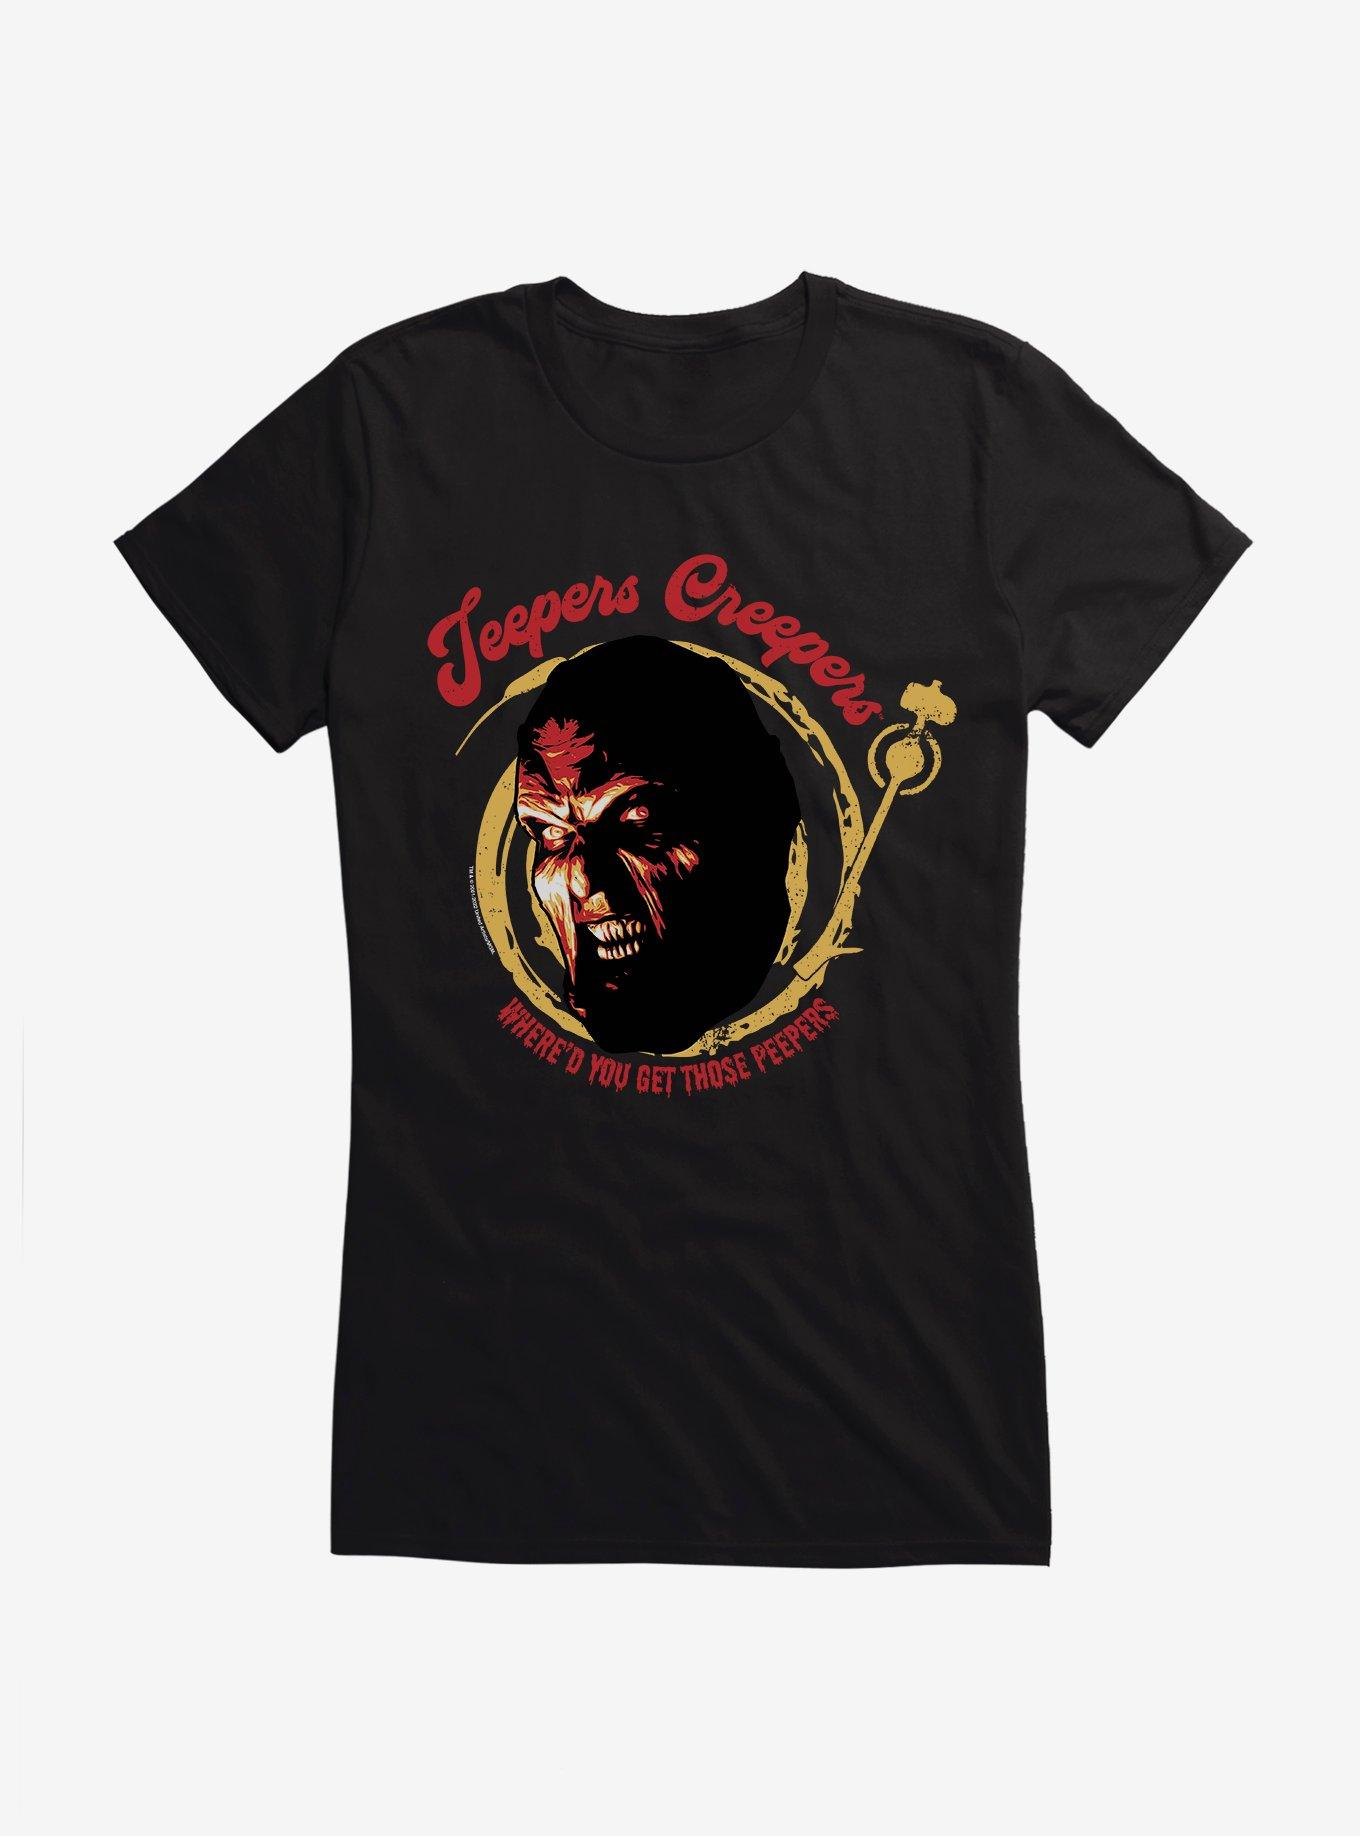 Jeepers Creepers Peepers Girls T-Shirt